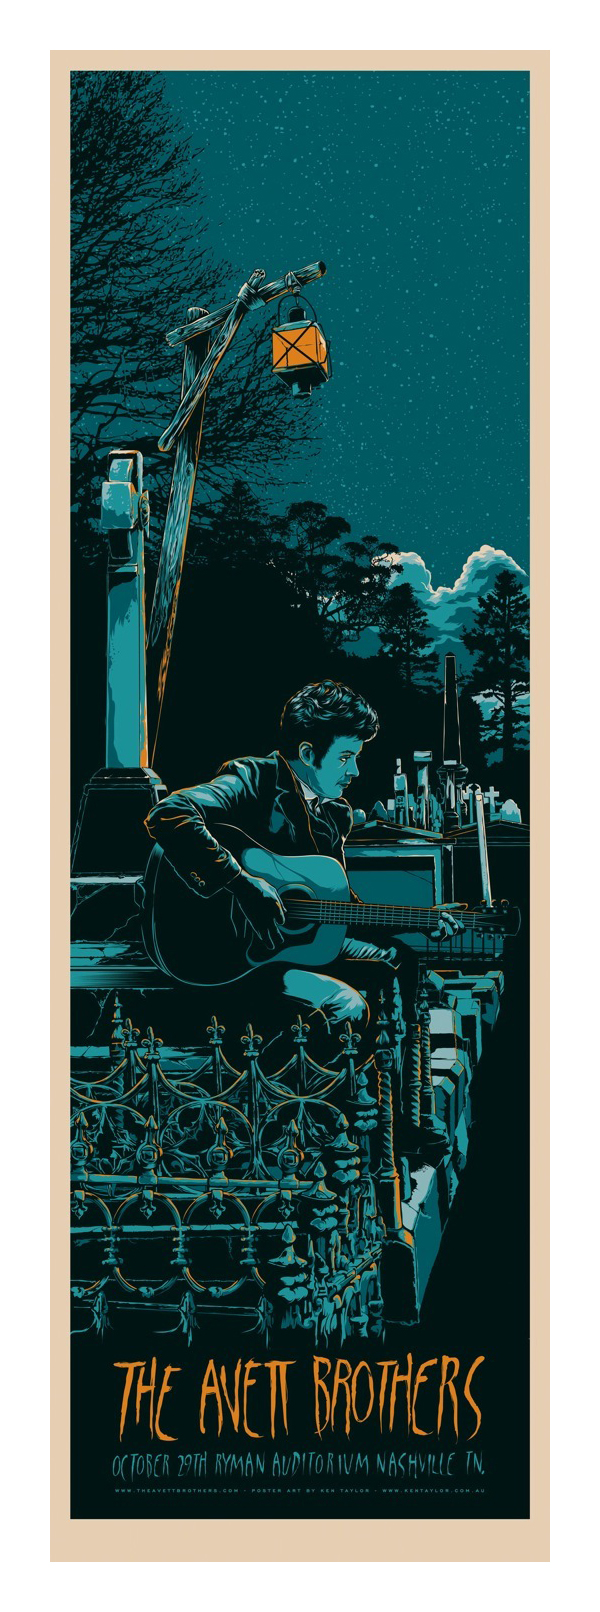 Avett Brothers Poster Set by Ken Taylor